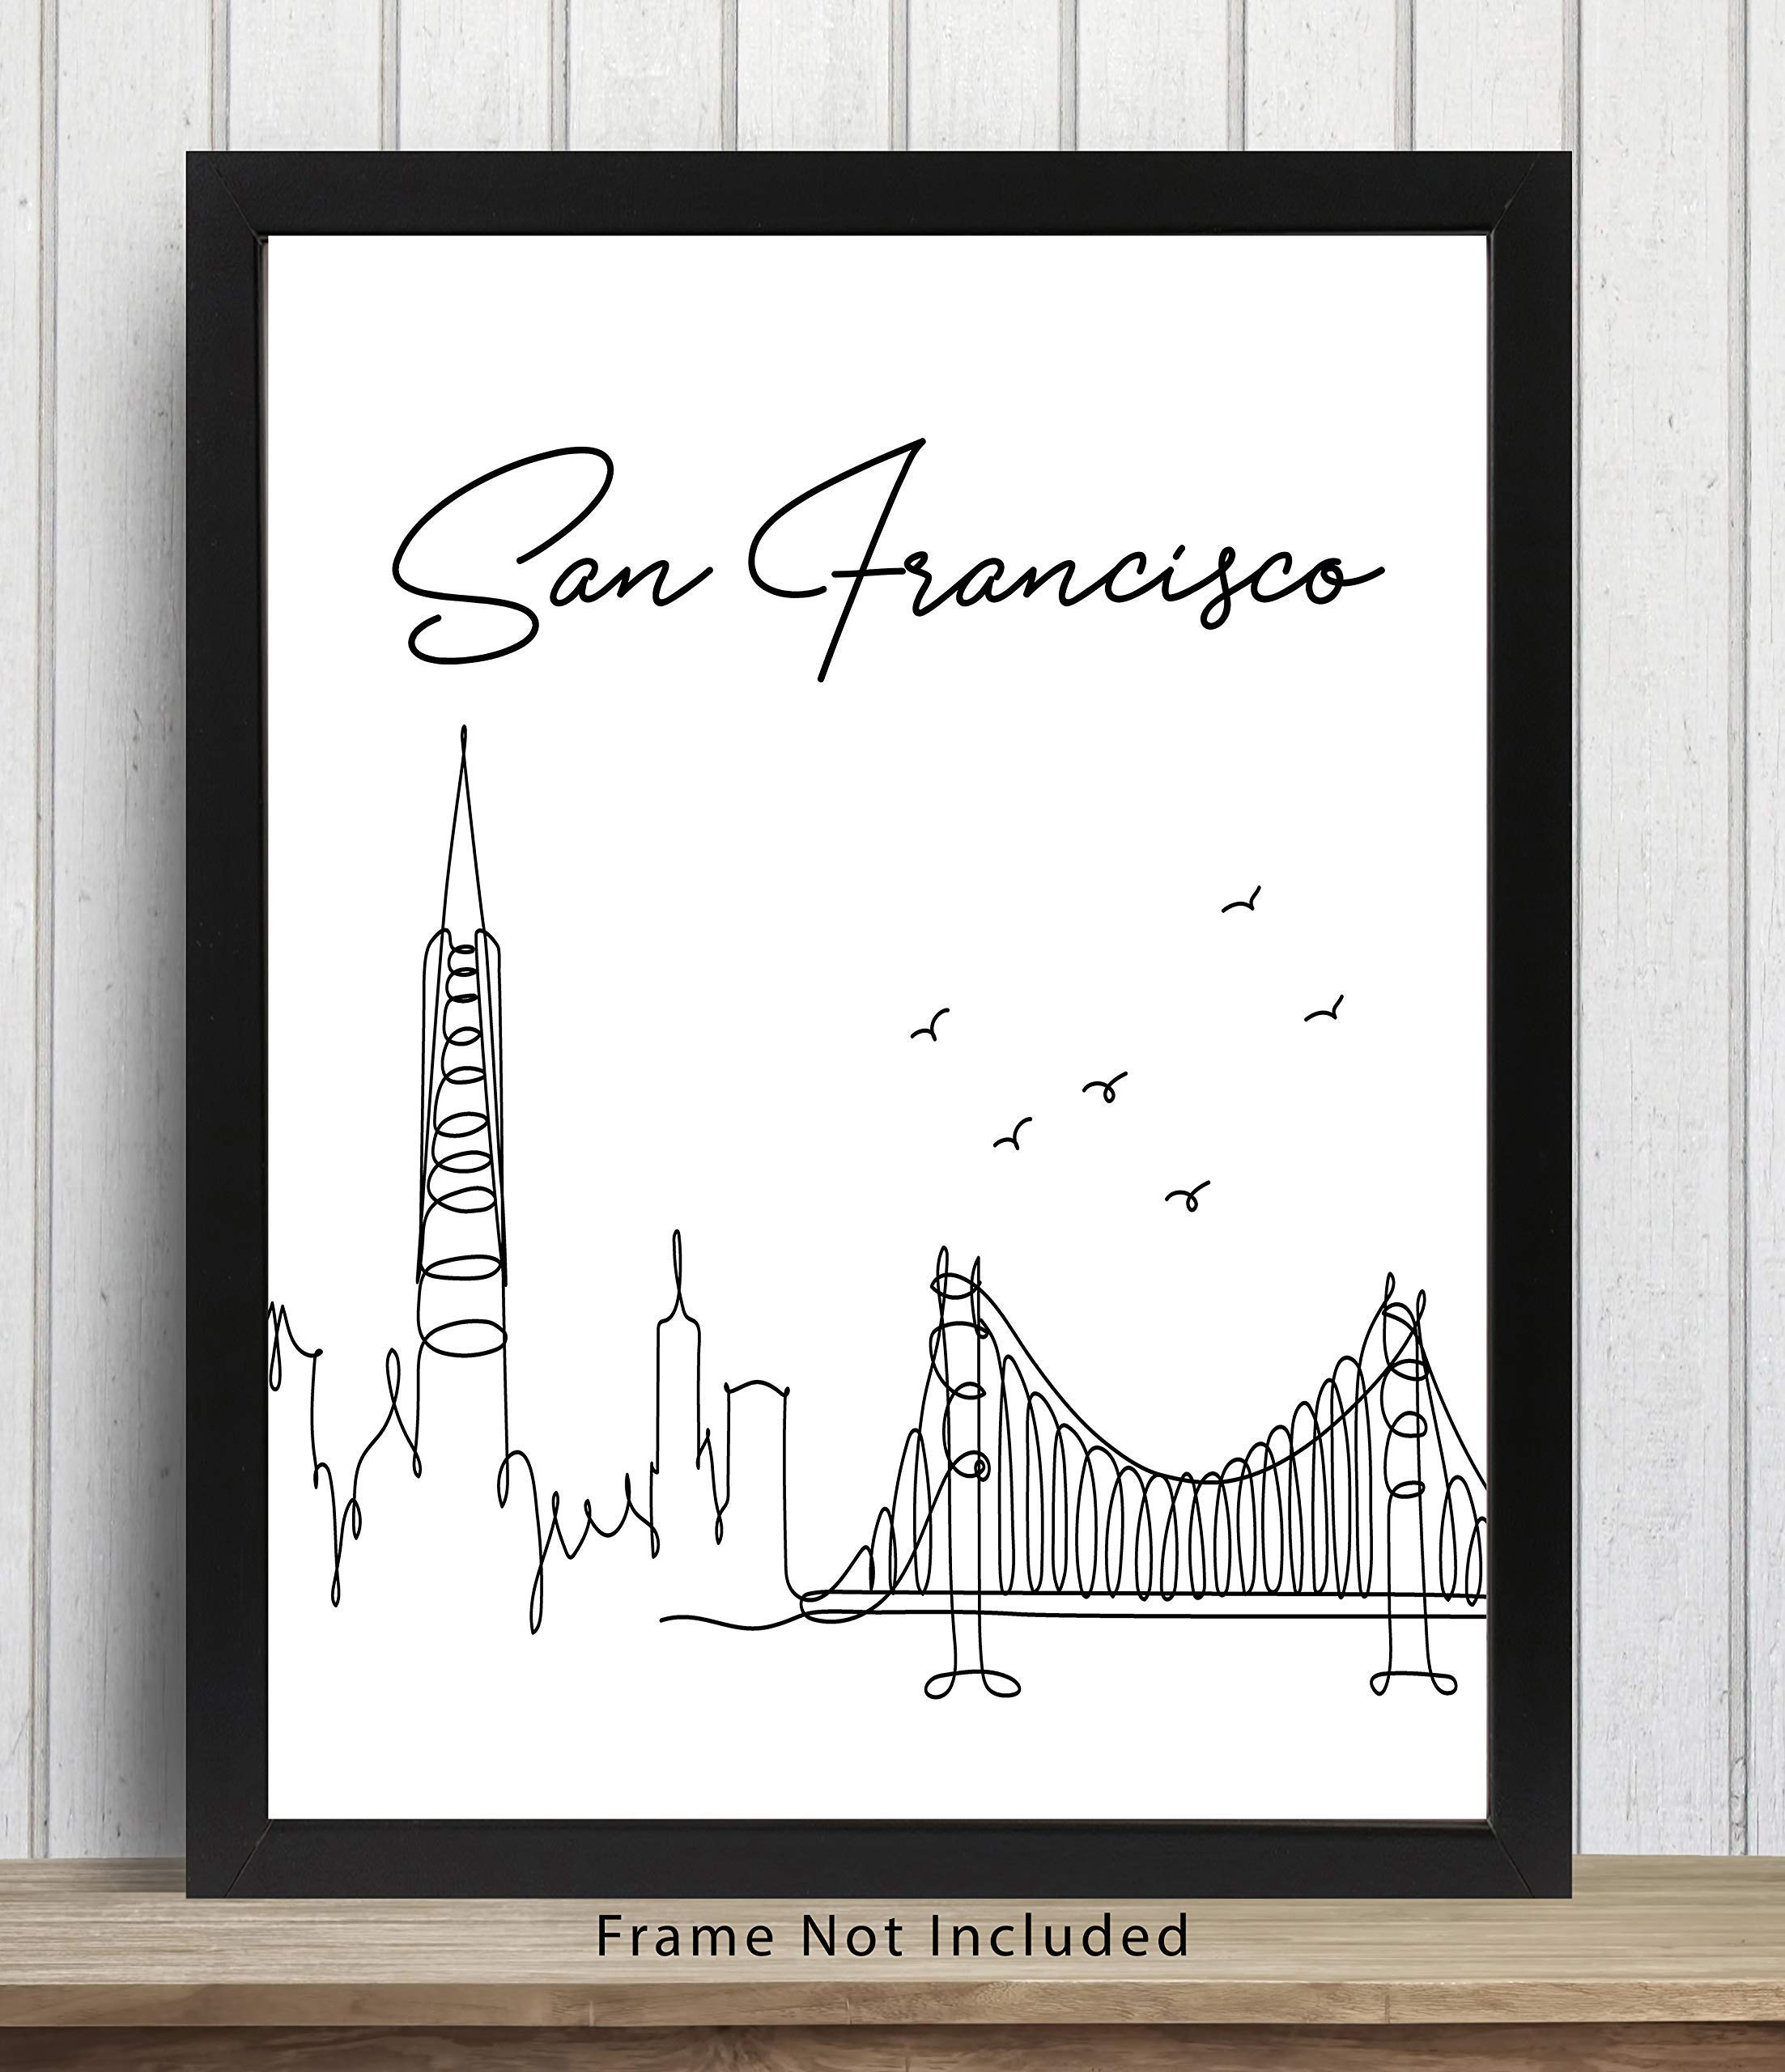 San Francisco City Skyline CityScape Wall Art - 11x14 UNFRAMED, Minimalist Line Art Black & White Decor Prints. A Perfect Gift for Anyone Who’s Ever ‘Left Their Heart in San Francisco”!